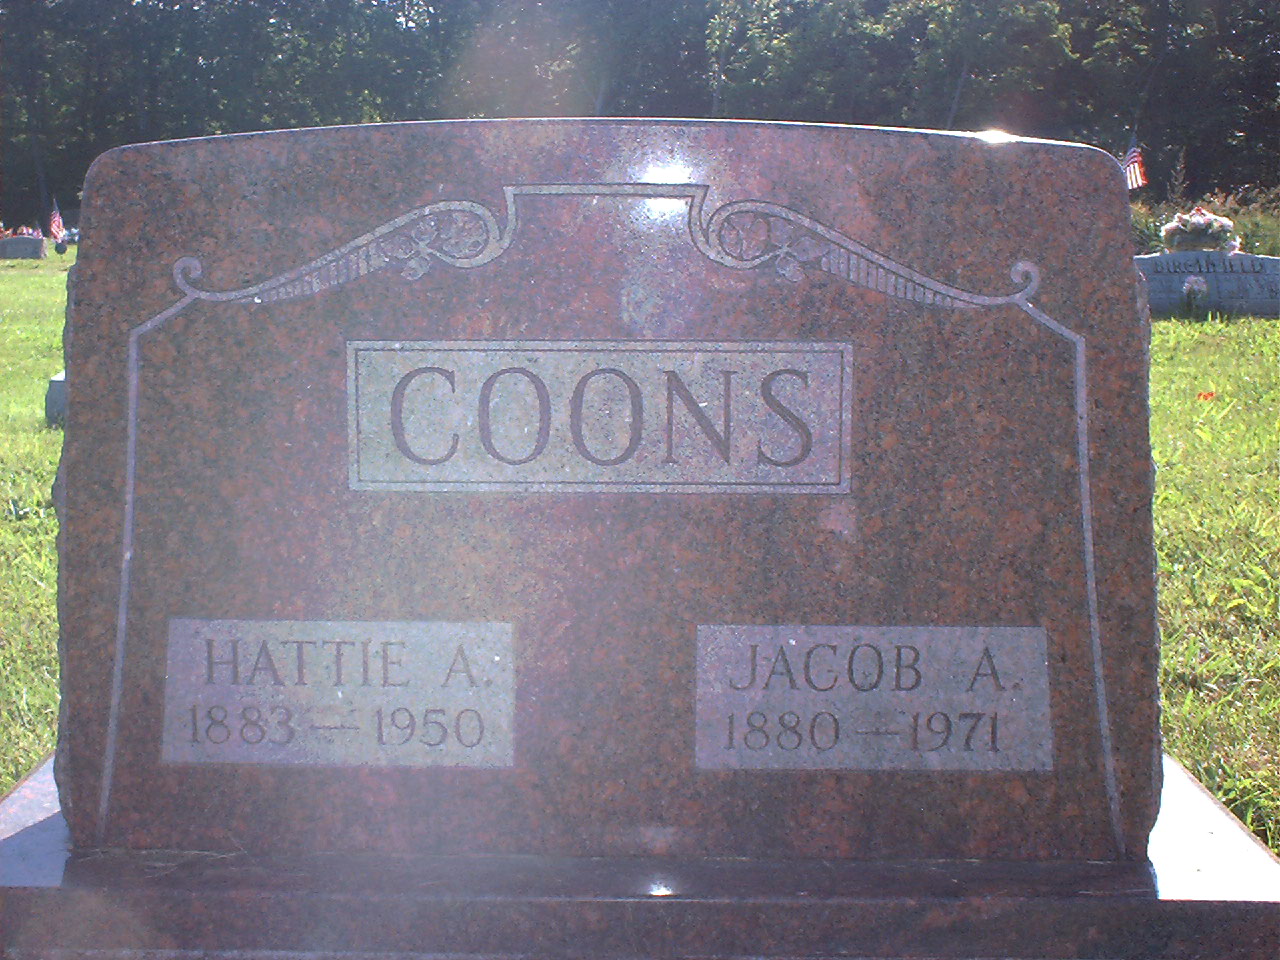 Jacob A. Coons headstone